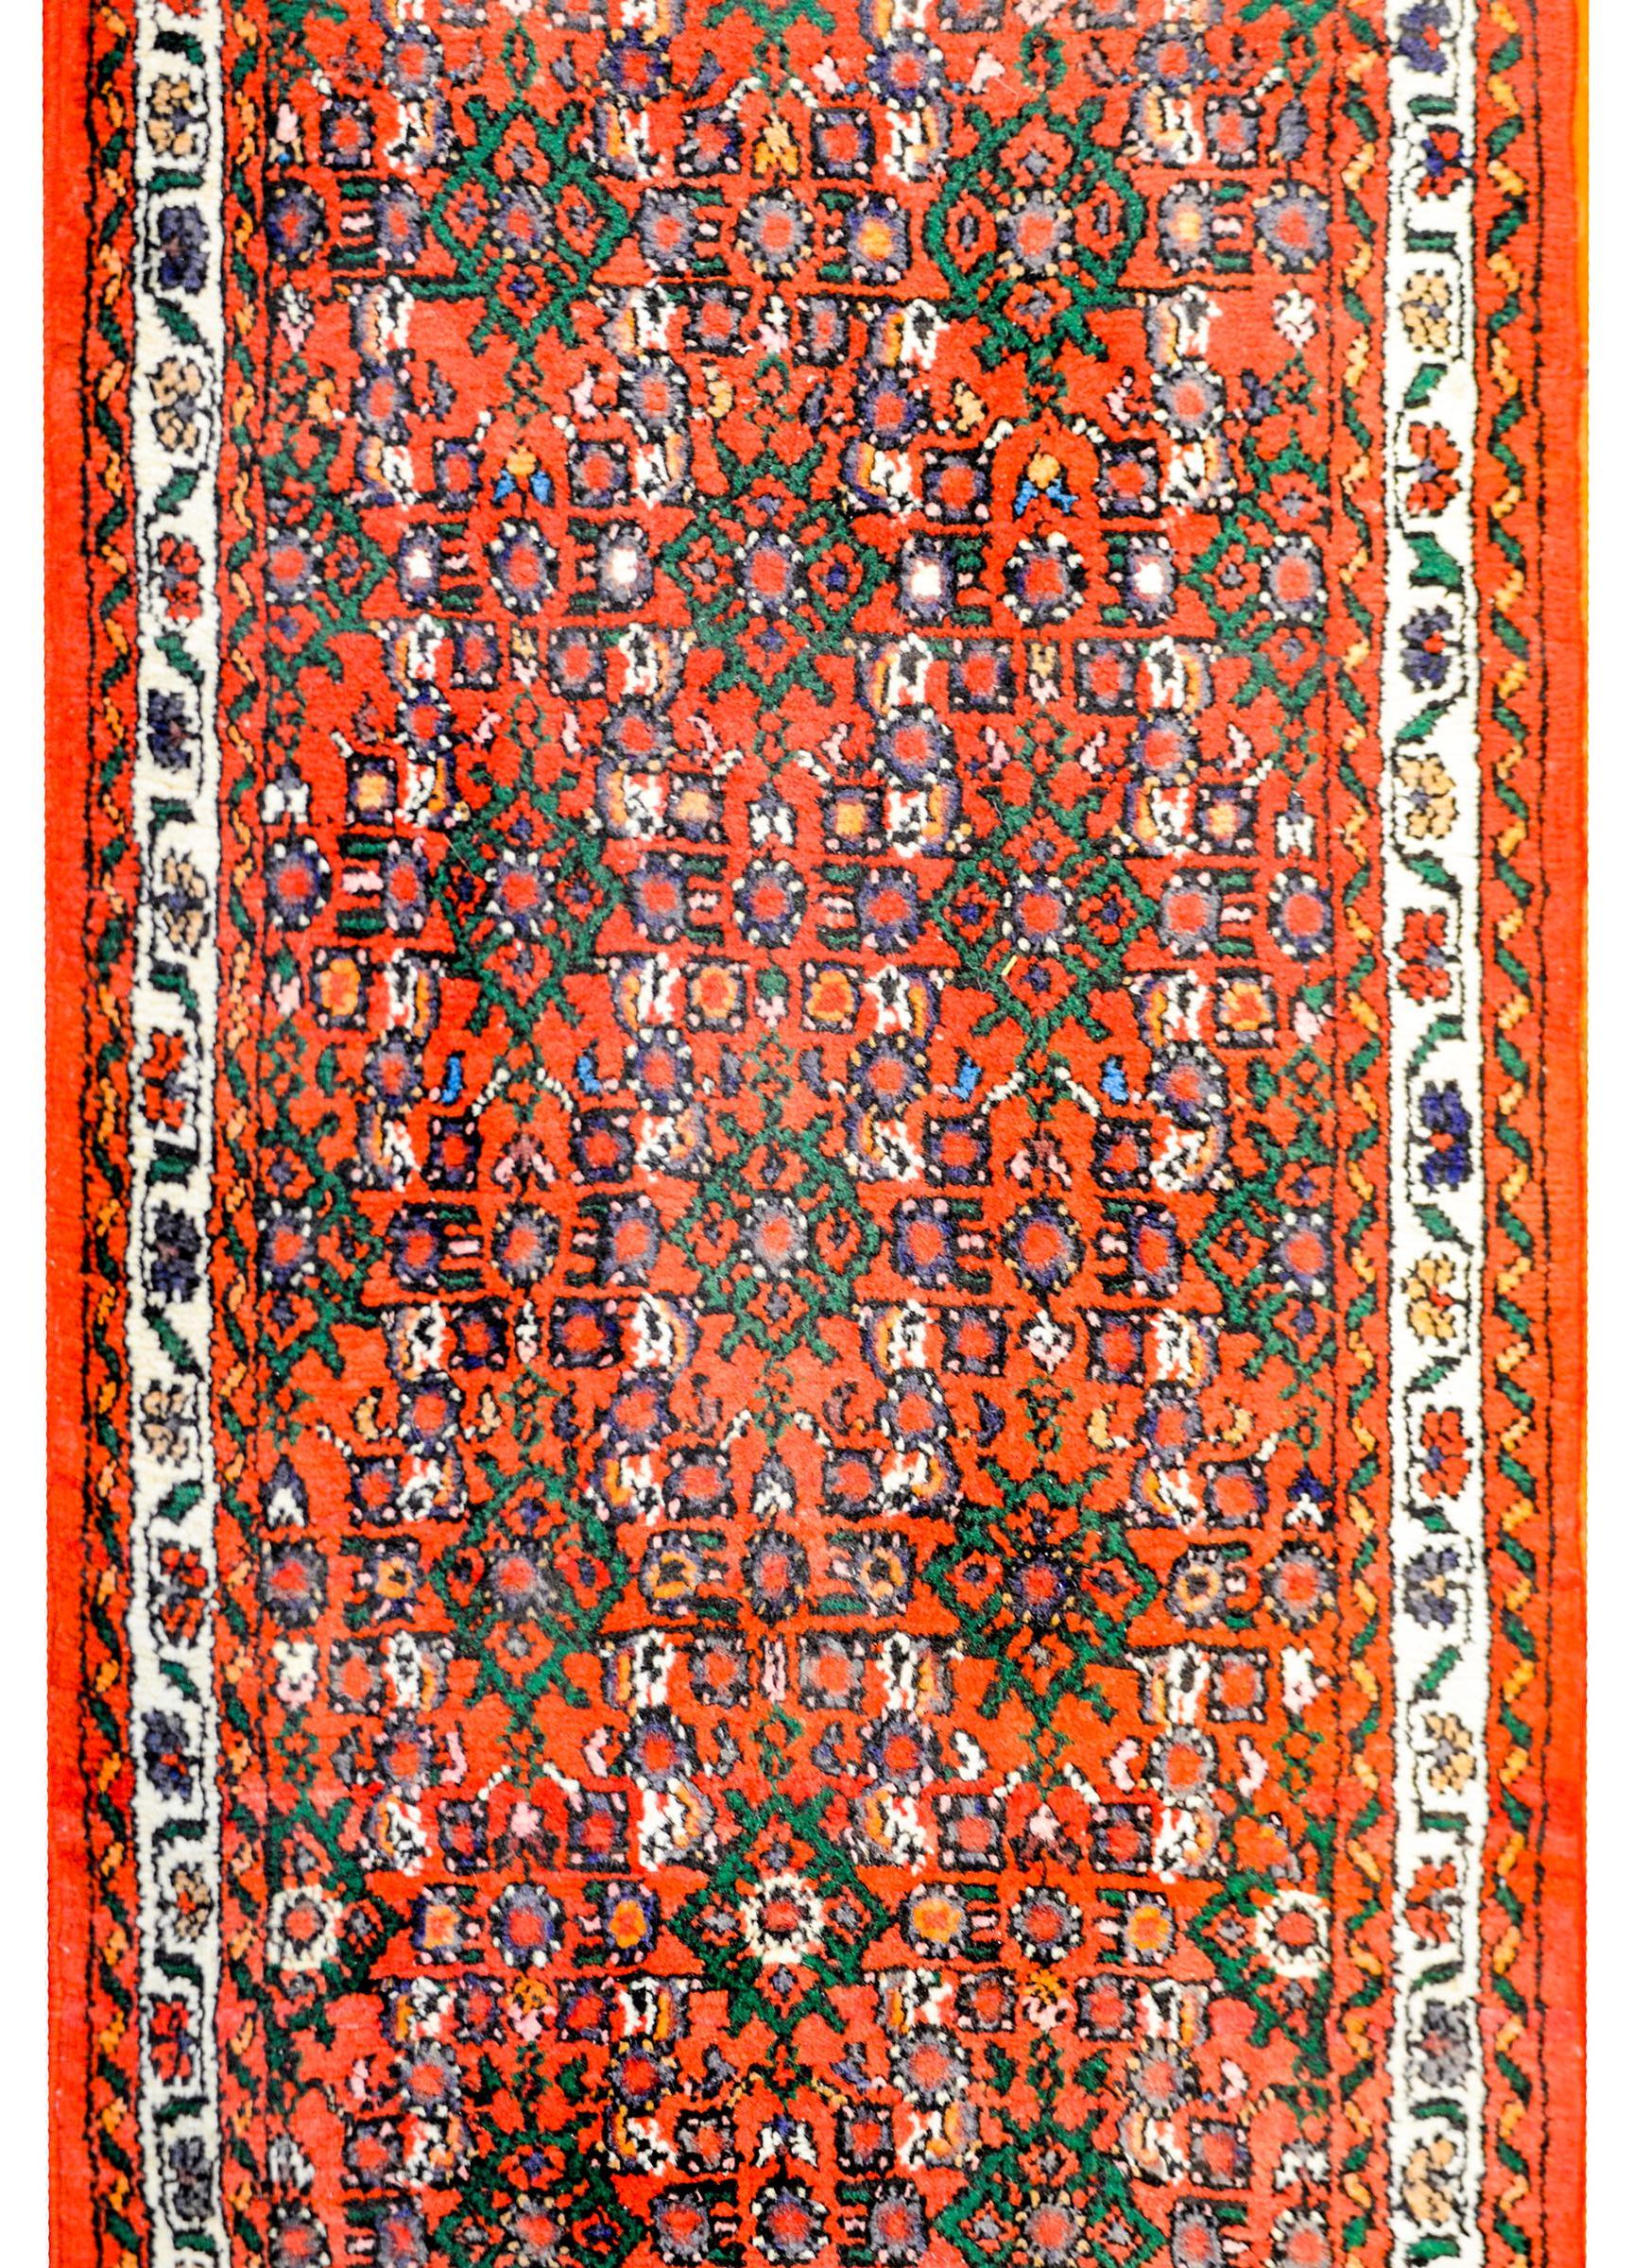 A wonderful mid-20th century Persian Dargazin runner with a fantastic all-over trellis and floral pattern woven in bold crimson, orange, green, and white vegetable dyed wool. The border is simple, with two thin petite floral patterned and scrolling